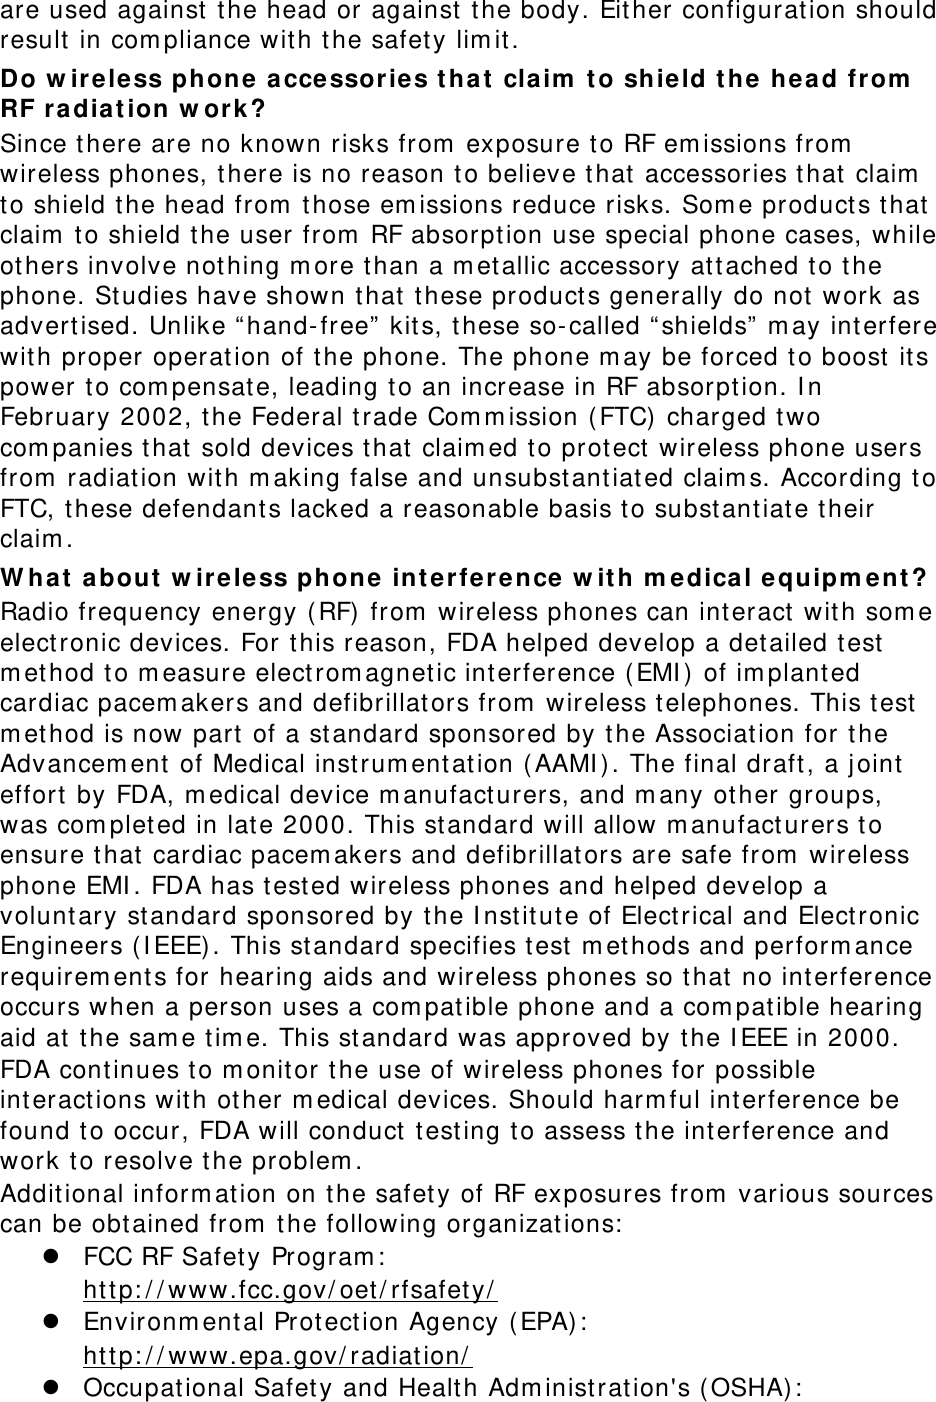 are used against t he head or against  t he body. Eit her configurat ion should result  in com pliance with t he safet y lim it . Do w ireless phone a ccessorie s t hat  cla im  t o shie ld t he head from  RF ra diat ion w or k ? Since there are no known risks from  exposure t o RF em issions from  wireless phones, t here is no reason t o believe t hat  accessories t hat  claim  to shield t he head from  t hose em issions reduce risks. Som e product s t hat  claim  to shield t he user from  RF absorpt ion use special phone cases, while others involve not hing m ore than a m et allic accessory att ached t o t he phone. St udies have shown t hat  t hese product s generally do not  work as advertised. Unlike “ hand- free”  kit s, t hese so- called “ shields”  m ay interfere wit h proper operation of t he phone. The phone m ay be forced to boost  it s power t o com pensat e, leading t o an increase in RF absorpt ion. I n February 2002, t he Federal t rade Com m ission ( FTC)  charged t wo com panies t hat sold devices t hat  claim ed to prot ect  wireless phone users from  radiation with m aking false and unsubstant iat ed claim s. According to FTC, these defendants lacked a reasonable basis t o substantiat e their claim . W hat  about  w irele ss phone int erference w it h  m e dica l equ ipm ent ? Radio frequency energy ( RF)  from  wireless phones can int eract  wit h som e electronic devices. For t his reason, FDA helped develop a det ailed t est  m ethod t o m easure elect rom agnet ic interference ( EMI )  of im plant ed cardiac pacem akers and defibrillat ors from  wireless telephones. This t est  m ethod is now part of a st andard sponsored by t he Association for t he Advancem ent  of Medical instrum ent at ion ( AAMI ) . The final draft , a j oint  effort  by FDA, m edical device m anufacturers, and m any ot her groups, was com plet ed in late 2000. This st andard will allow m anufacturers t o ensure t hat cardiac pacem akers and defibrillat ors are safe from  wireless phone EMI . FDA has test ed wireless phones and helped develop a volunt ary st andard sponsored by t he I nstit ute of Elect rical and Elect ronic Engineers ( I EEE) . This standard specifies t est  m et hods and perform ance requirem ents for hearing aids and wireless phones so that  no int erference occurs when a person uses a com pat ible phone and a com pat ible hearing aid at  t he sam e t im e. This st andard was approved by t he I EEE in 2000. FDA cont inues t o m onitor t he use of wireless phones for possible int eractions with ot her m edical devices. Should harm ful int erference be found t o occur, FDA will conduct  t est ing to assess t he int erference and work t o resolve the problem . Addit ional inform ation on t he safet y of RF exposures from  various sources can be obtained from  t he following organizations:  z FCC RF Safet y Program :   ht t p: / / www.fcc.gov/ oet / rfsafet y/  z Environm ent al Prot ect ion Agency ( EPA) :   ht t p: / / www.epa.gov/ radiation/  z Occupat ional Safet y and Healt h Adm inistrat ion&apos;s ( OSHA) :    